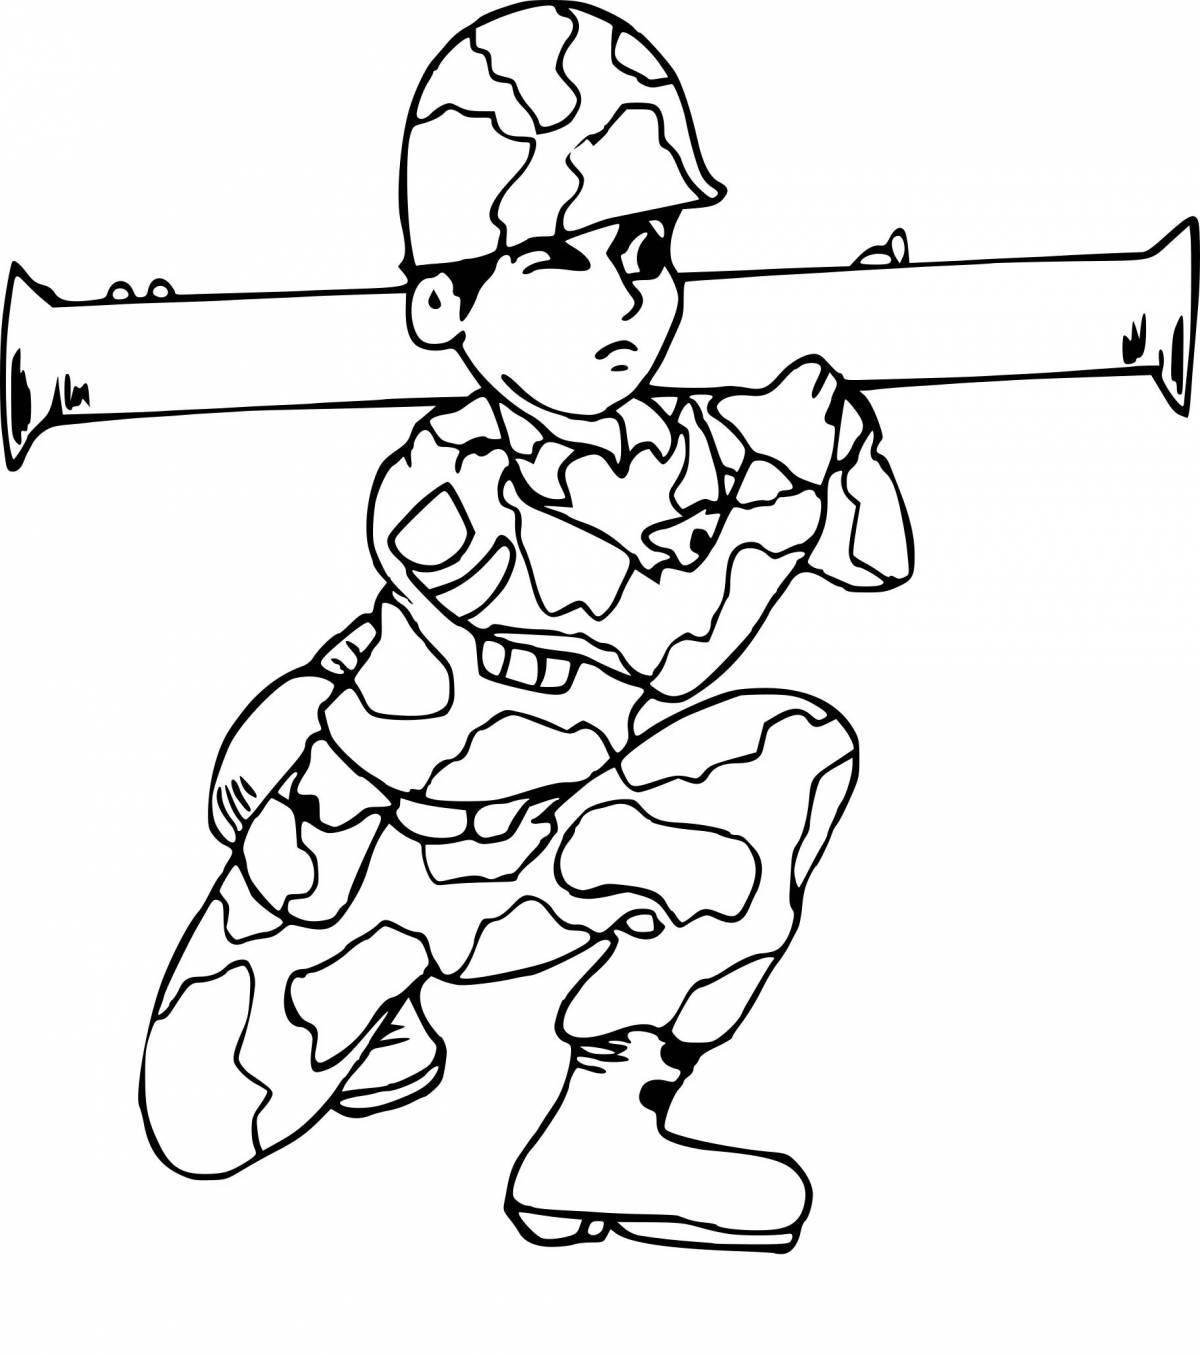 February 23 brave soldier coloring page